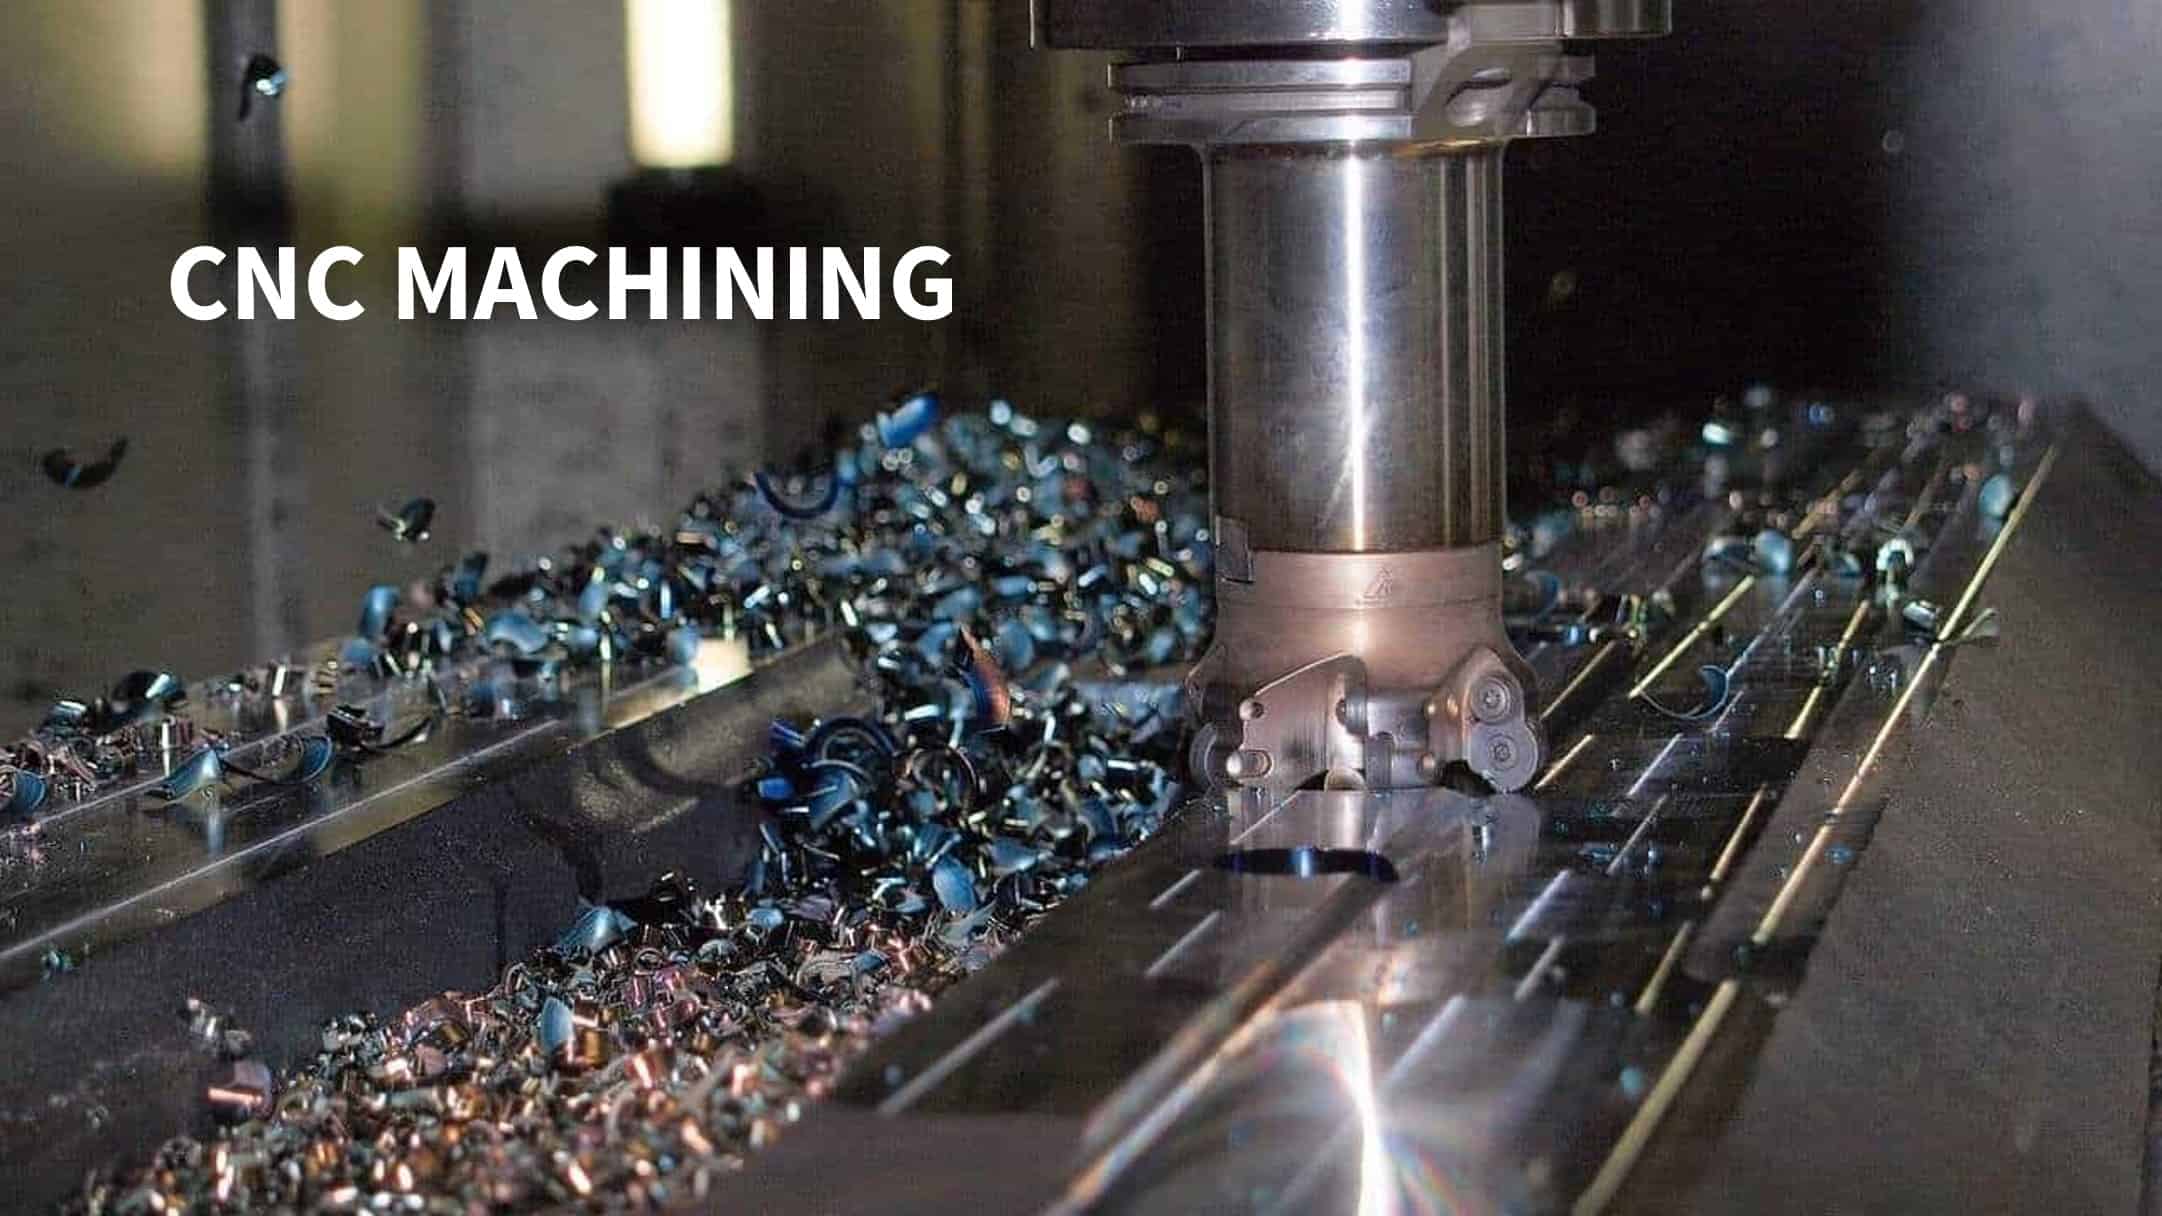 How CNC Machining and 3D Printing Can Work Together in Your Shop